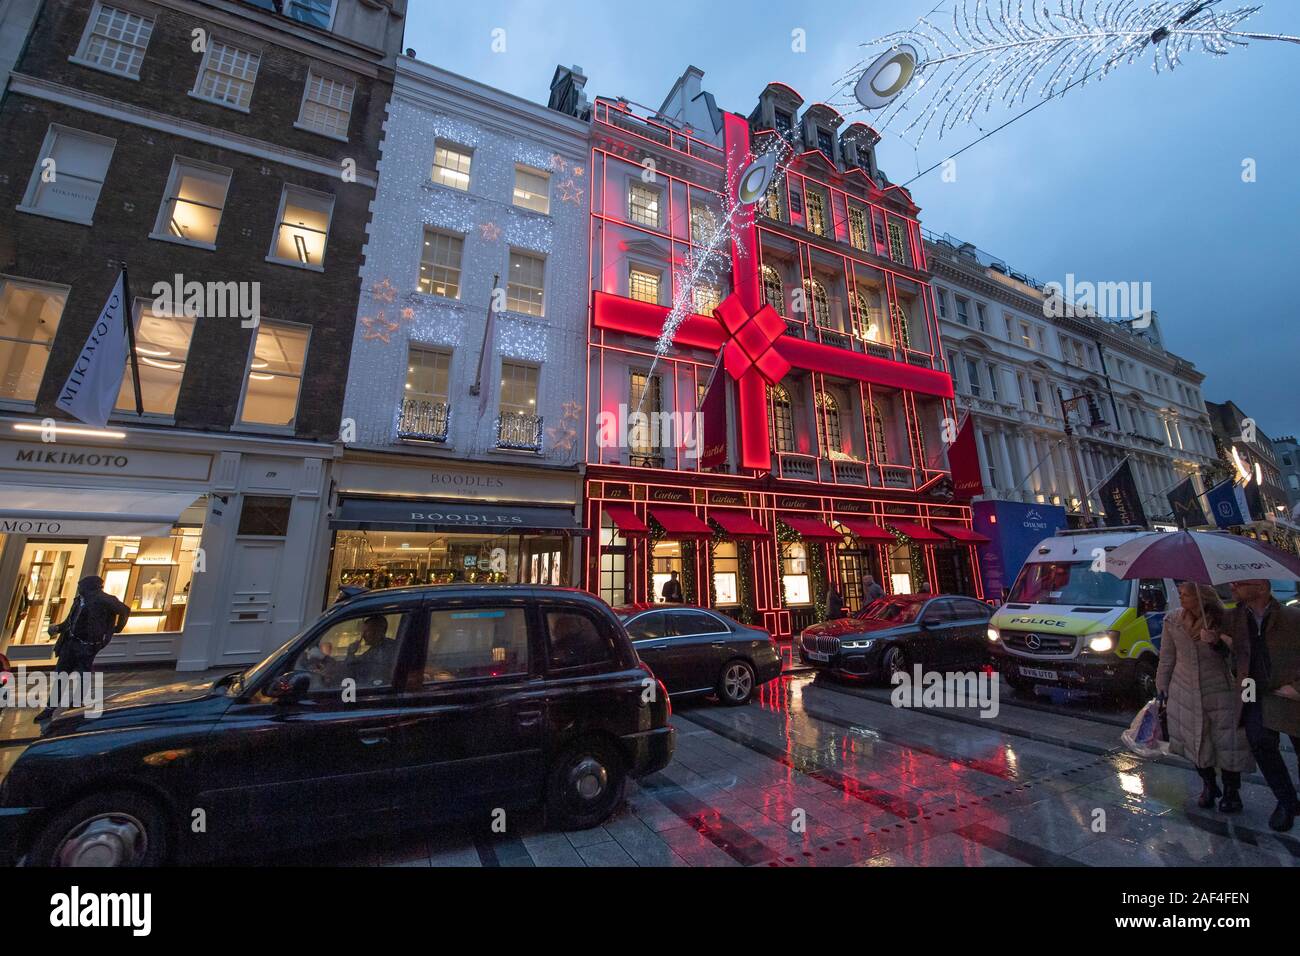 Mayfair, London, UK. 12th December 2019. Christmas decorated shops in London’s exclusive shopping thoroughfare, New Bond Street, with tourists, shoppers and home-going office workers on rain soaked pavements. Credit: Malcolm Park/Alamy Live News. Stock Photo